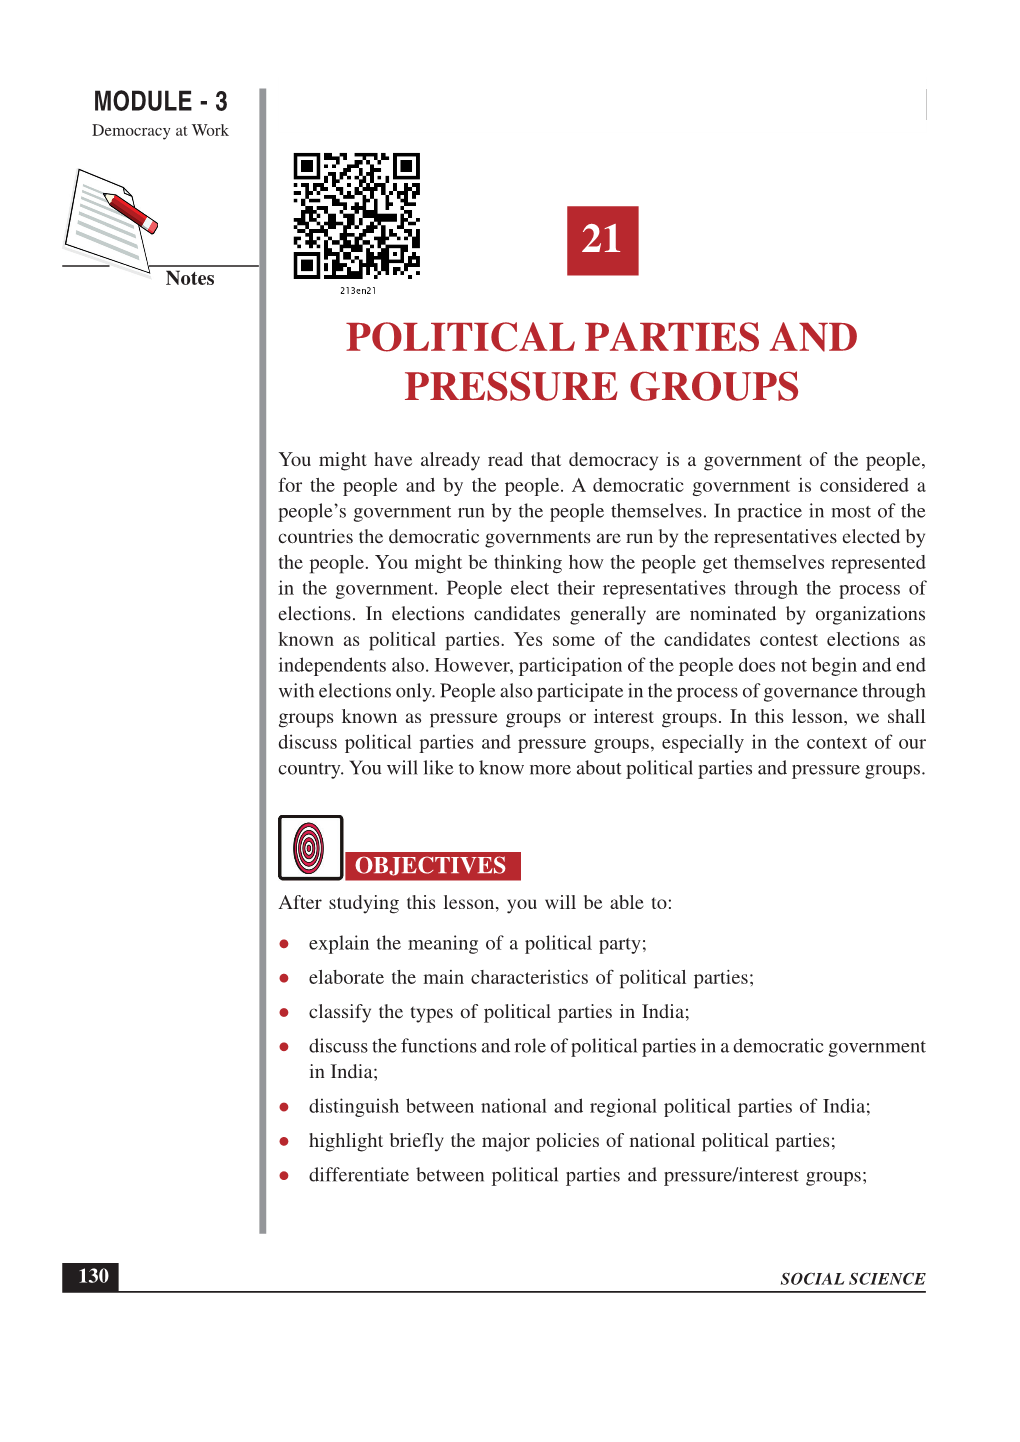 Political Parties and Pressure Groups(1562